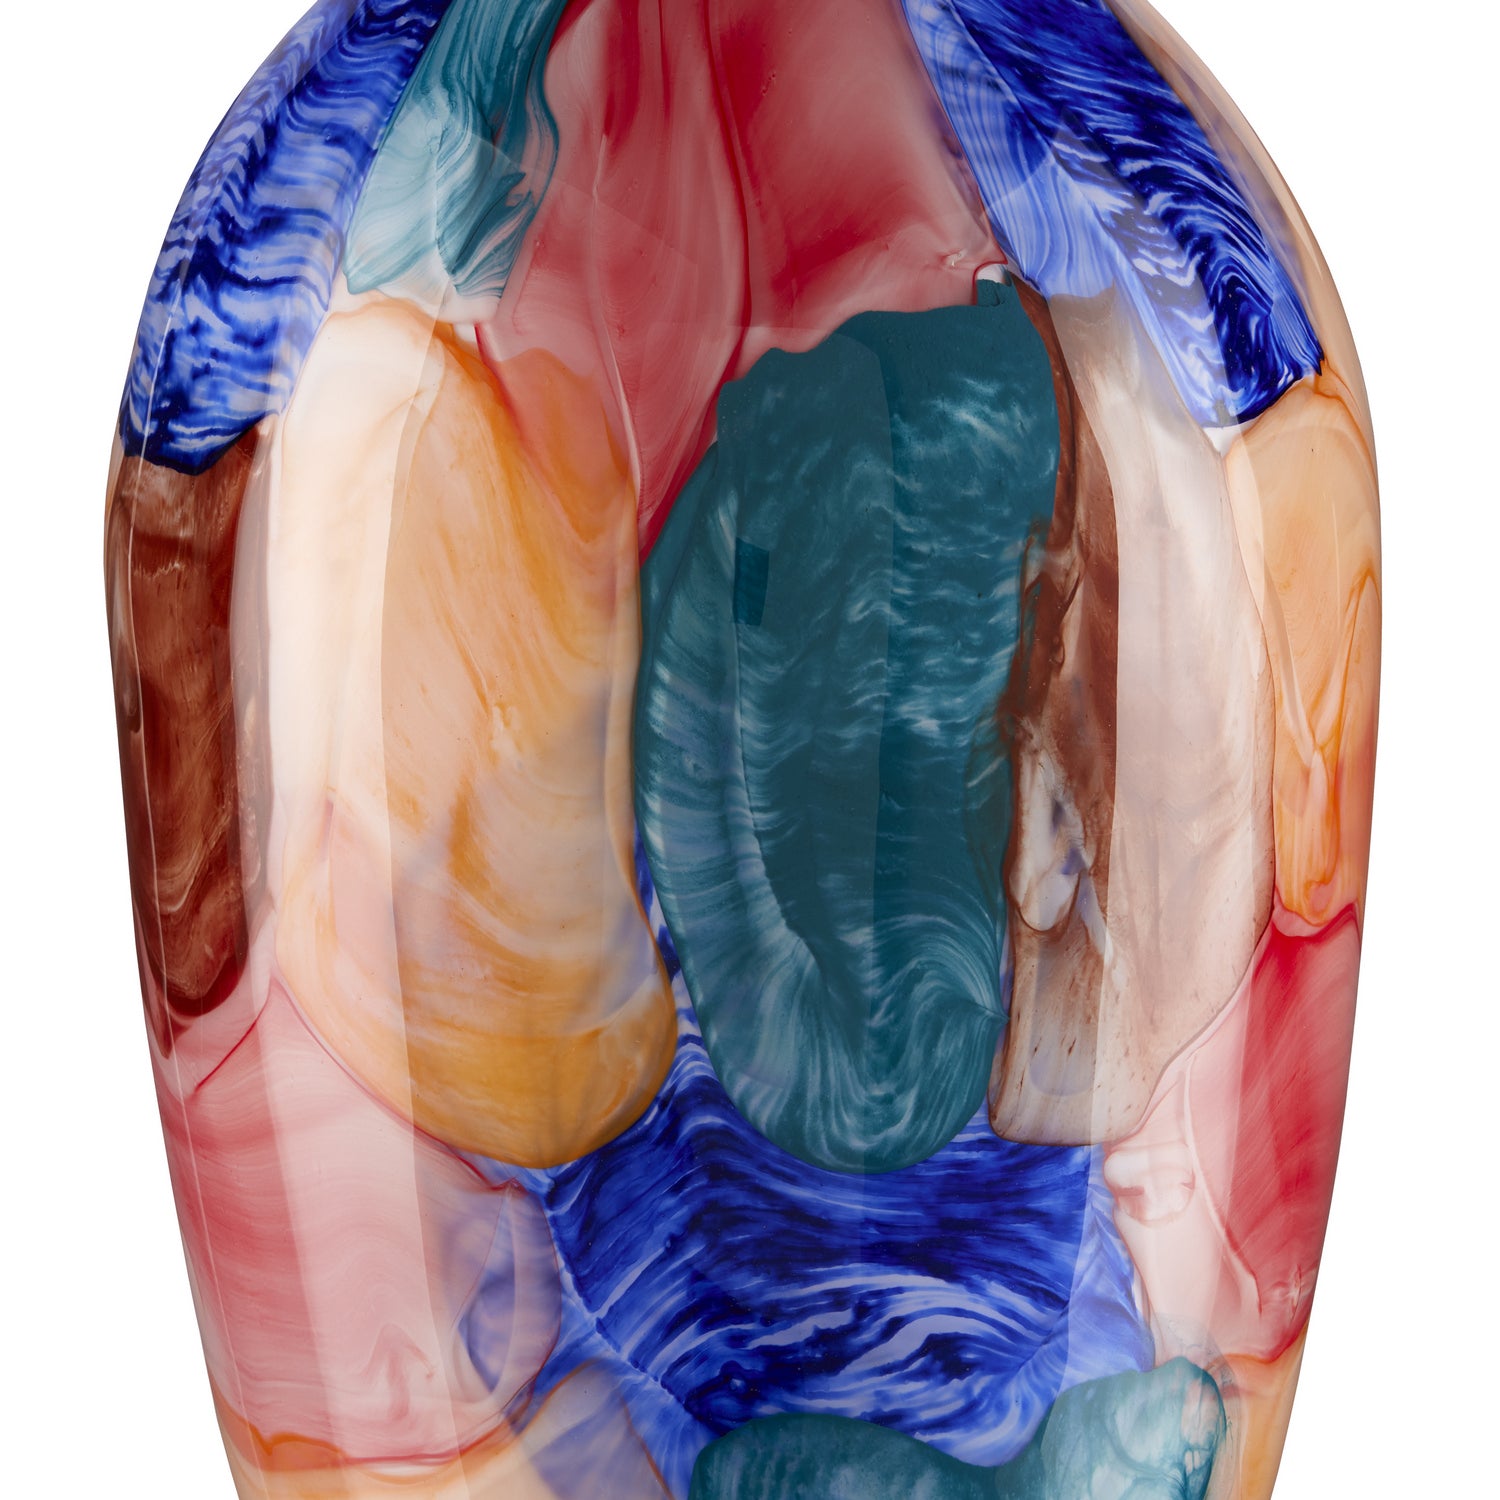 Vase from the Sarto collection in Blue/Orange/Green finish